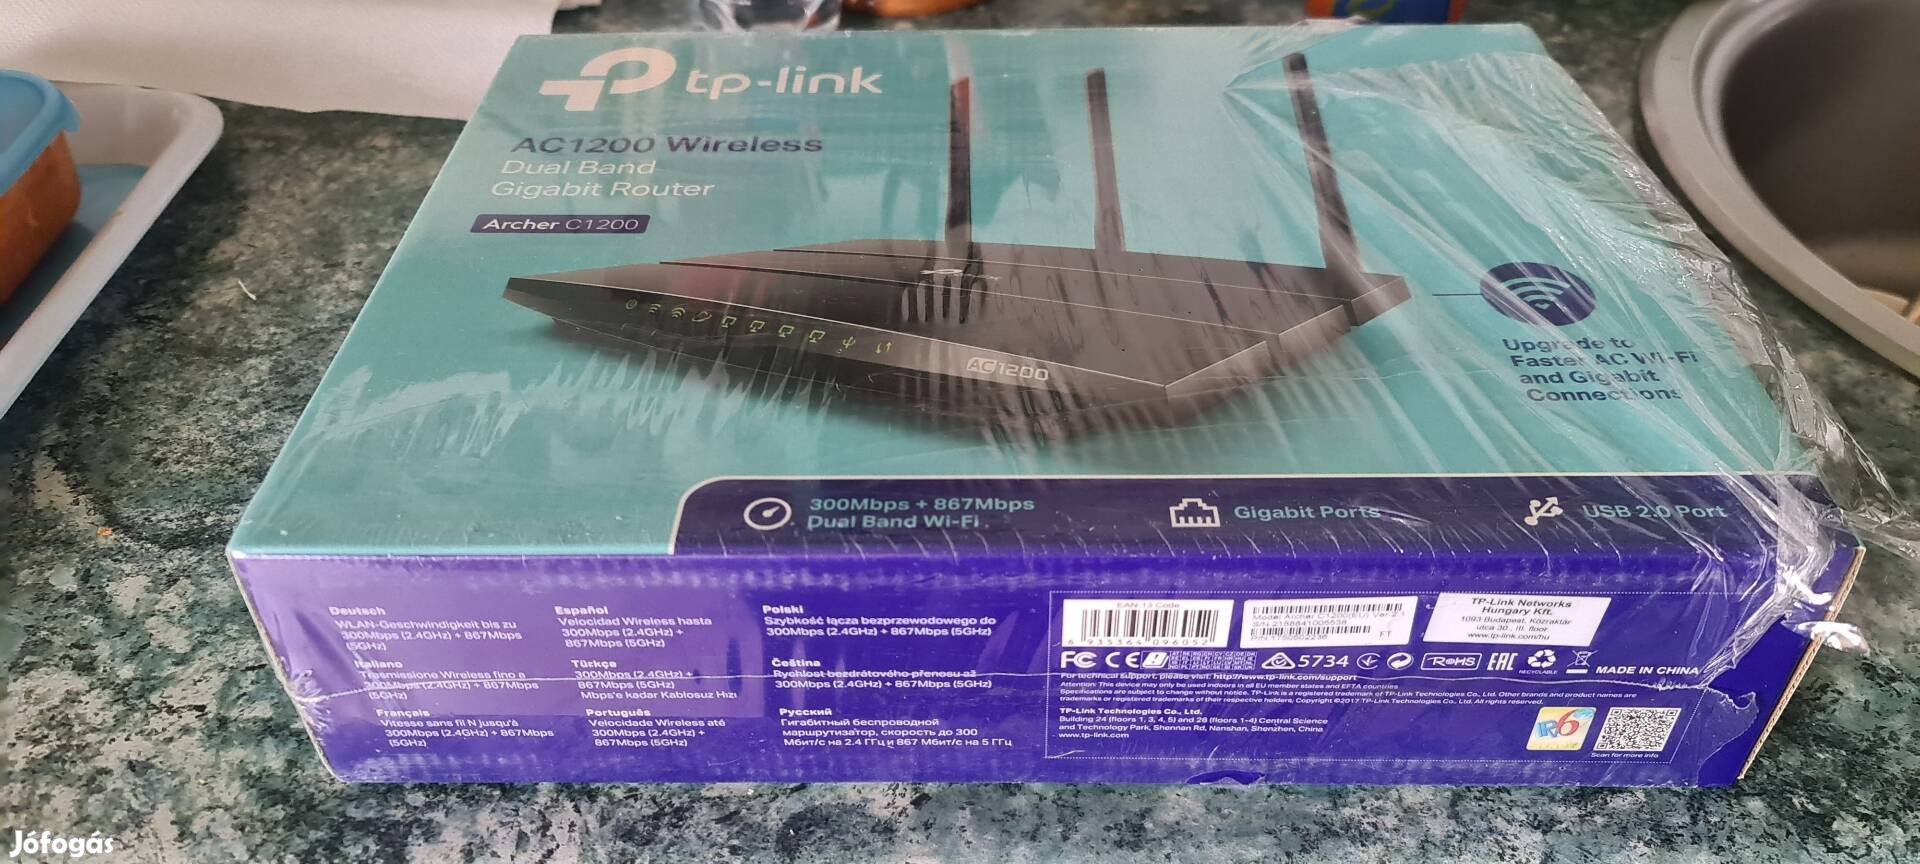 Tp-link wifi routher eladó